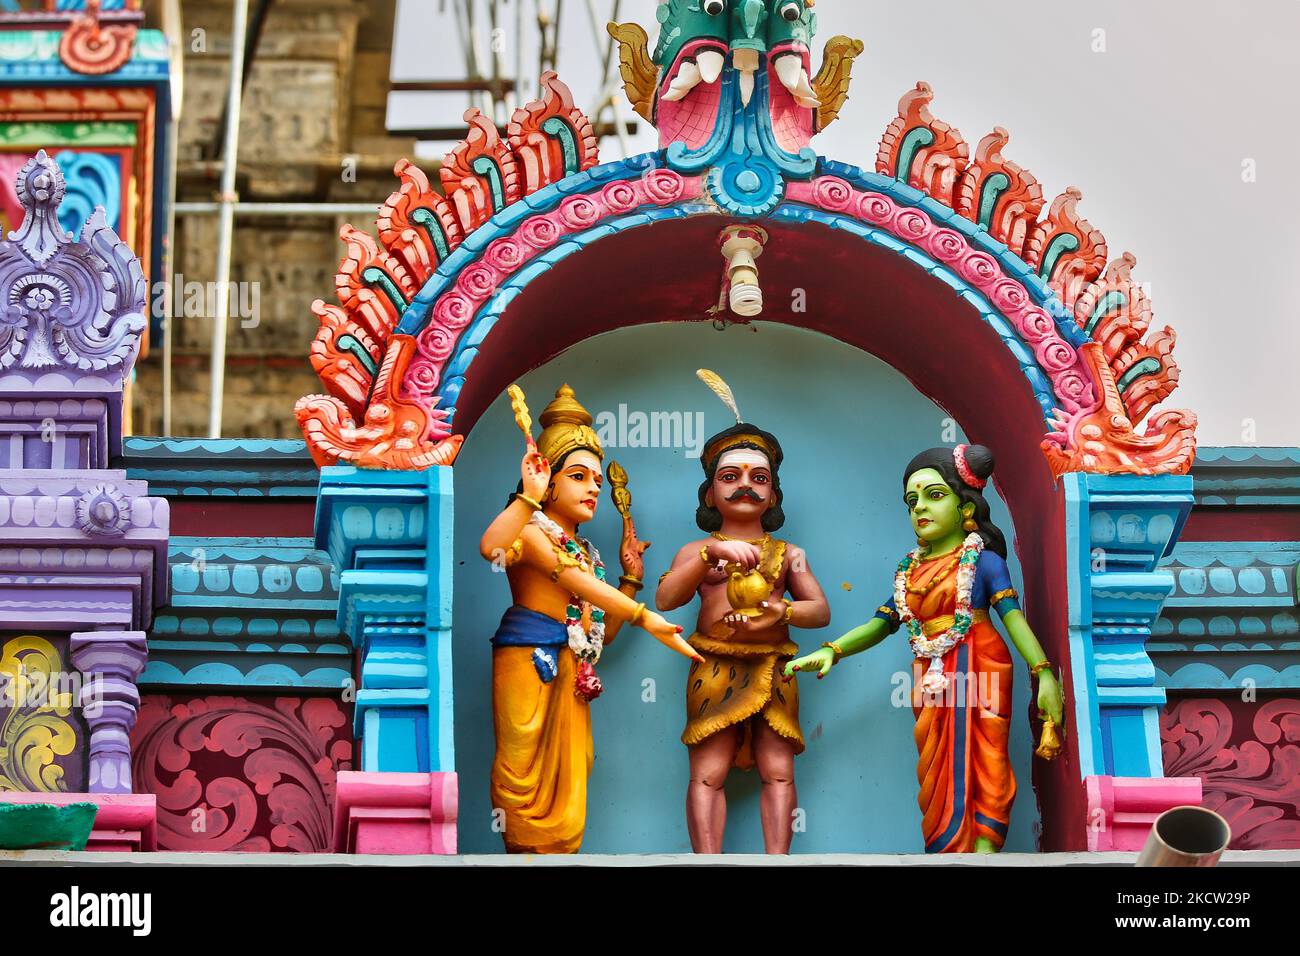 Figures of Hindu deities adorn a Hindu temple in Mullaitivu, Sri Lanka. This temple was known to have been frequented by Velupillai Prabhakaran, the deceased leader of the LTTE (Liberation Tigers of Tamil Eelam) fighters. The temple was damaged during bombing by the Sri Lankan army during the civil war and is now being rebuilt. (Photo by Creative Touch Imaging Ltd./NurPhoto) Stock Photo